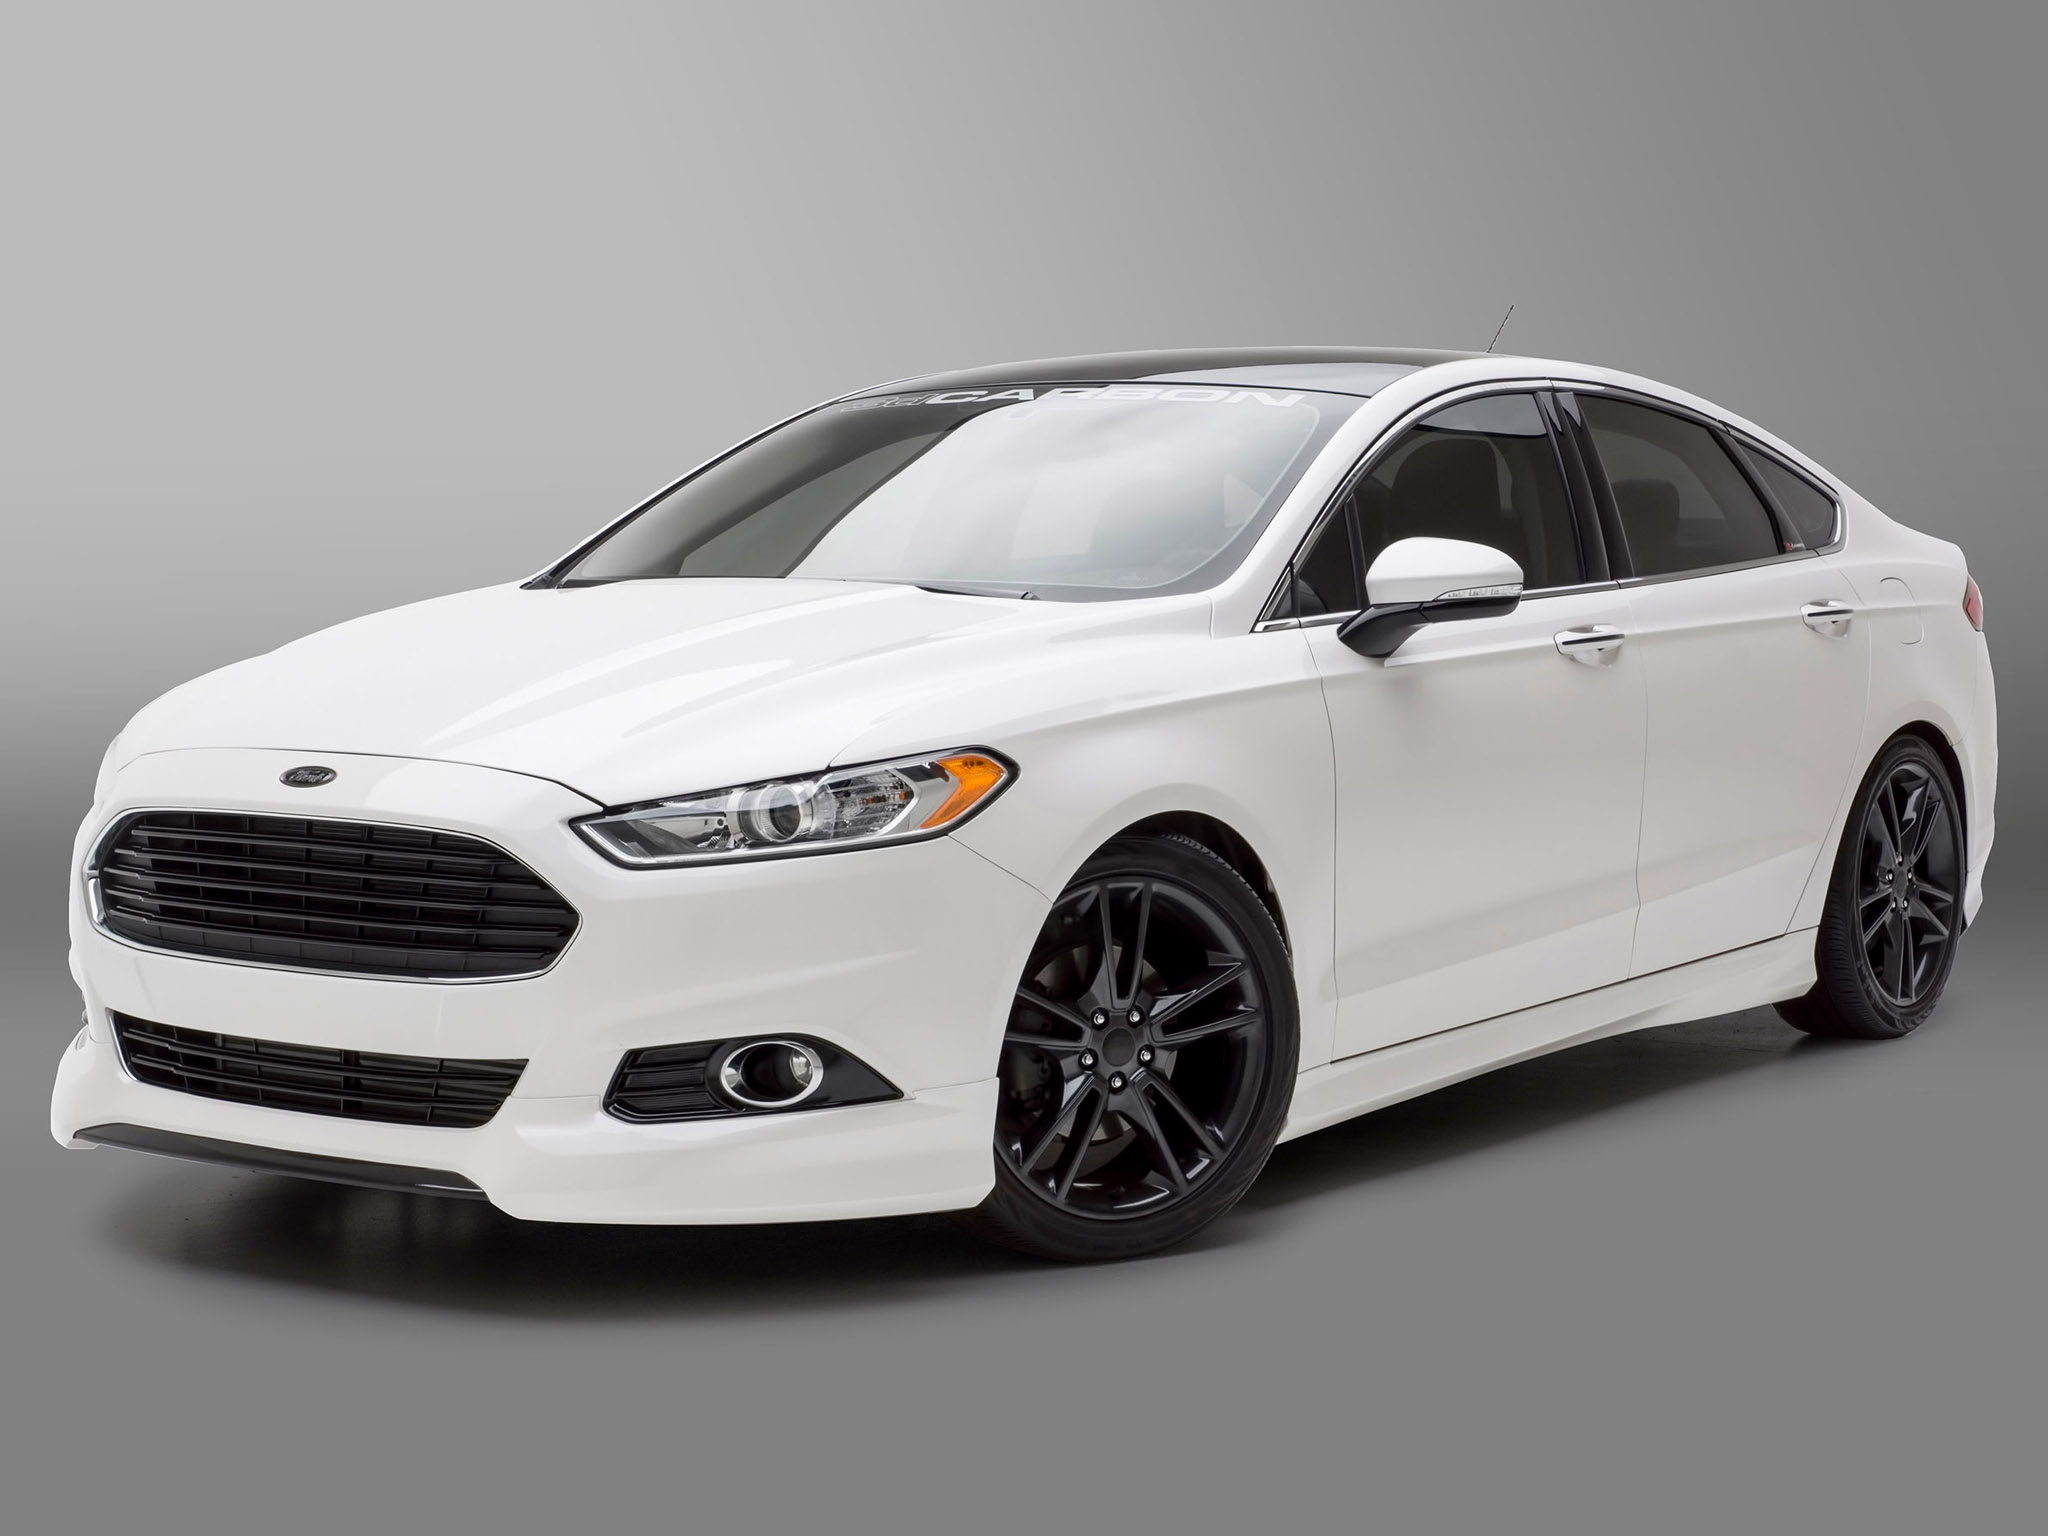 2013, 3dcarbon, Ford, Fusion, Tuning Wallpaper